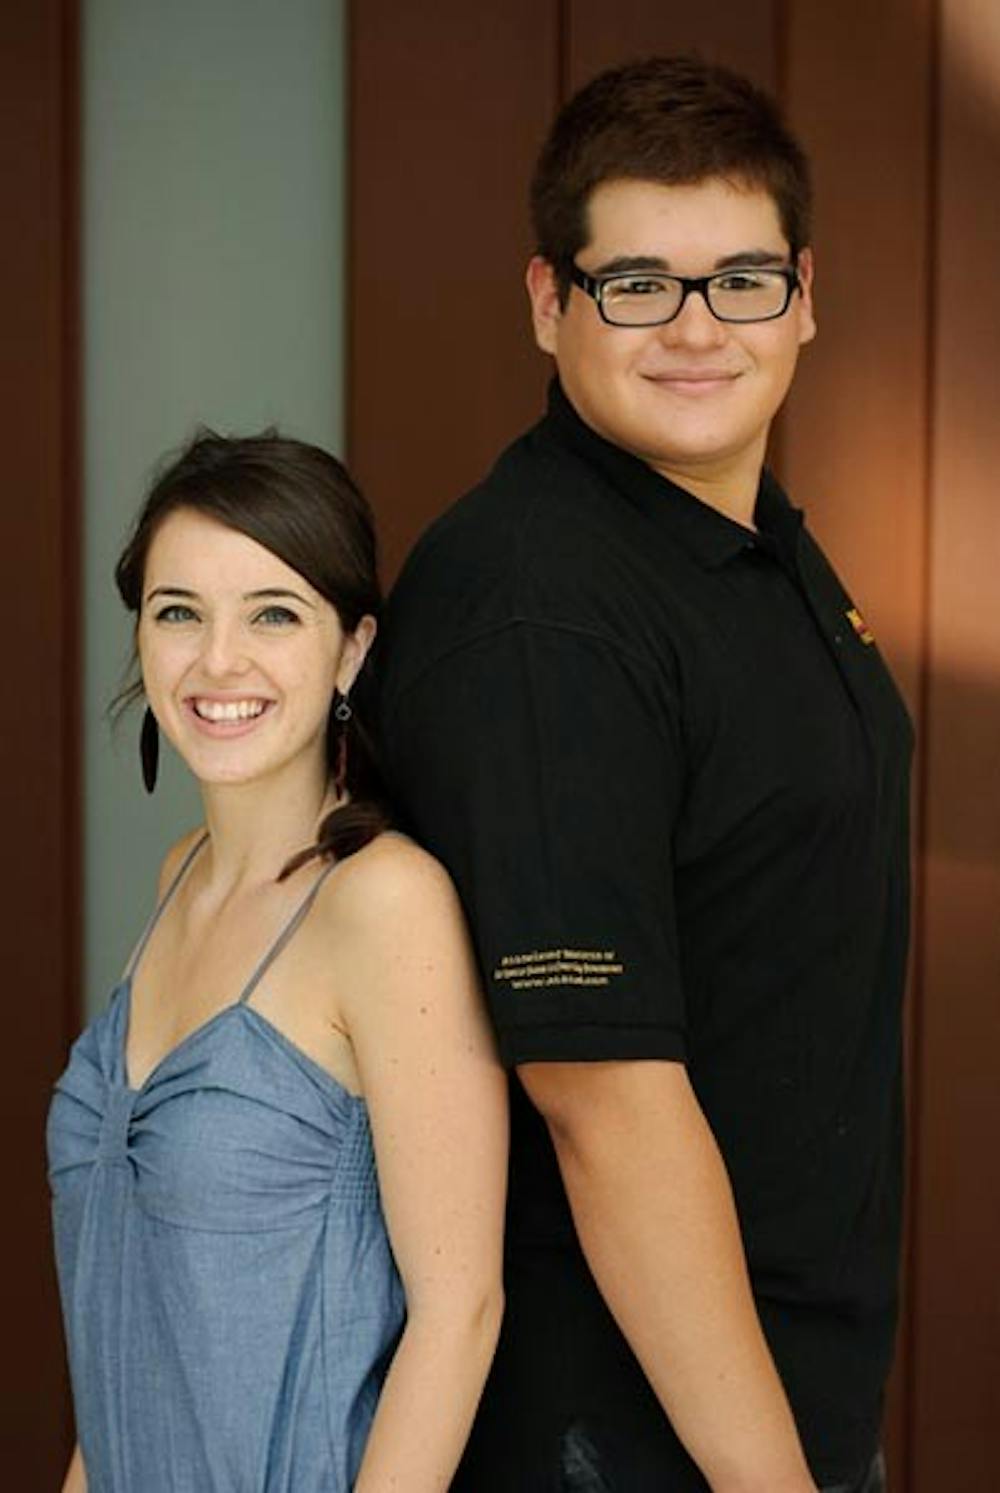 UNITING STUDENT LEADERS: Downtown ASU Undergraduate Student Government president Christian Vasquez and vice president Jessica Abercrombie hope to help downtown student government in a positive direction after last year. (Photo by Aaron Lavinsky)